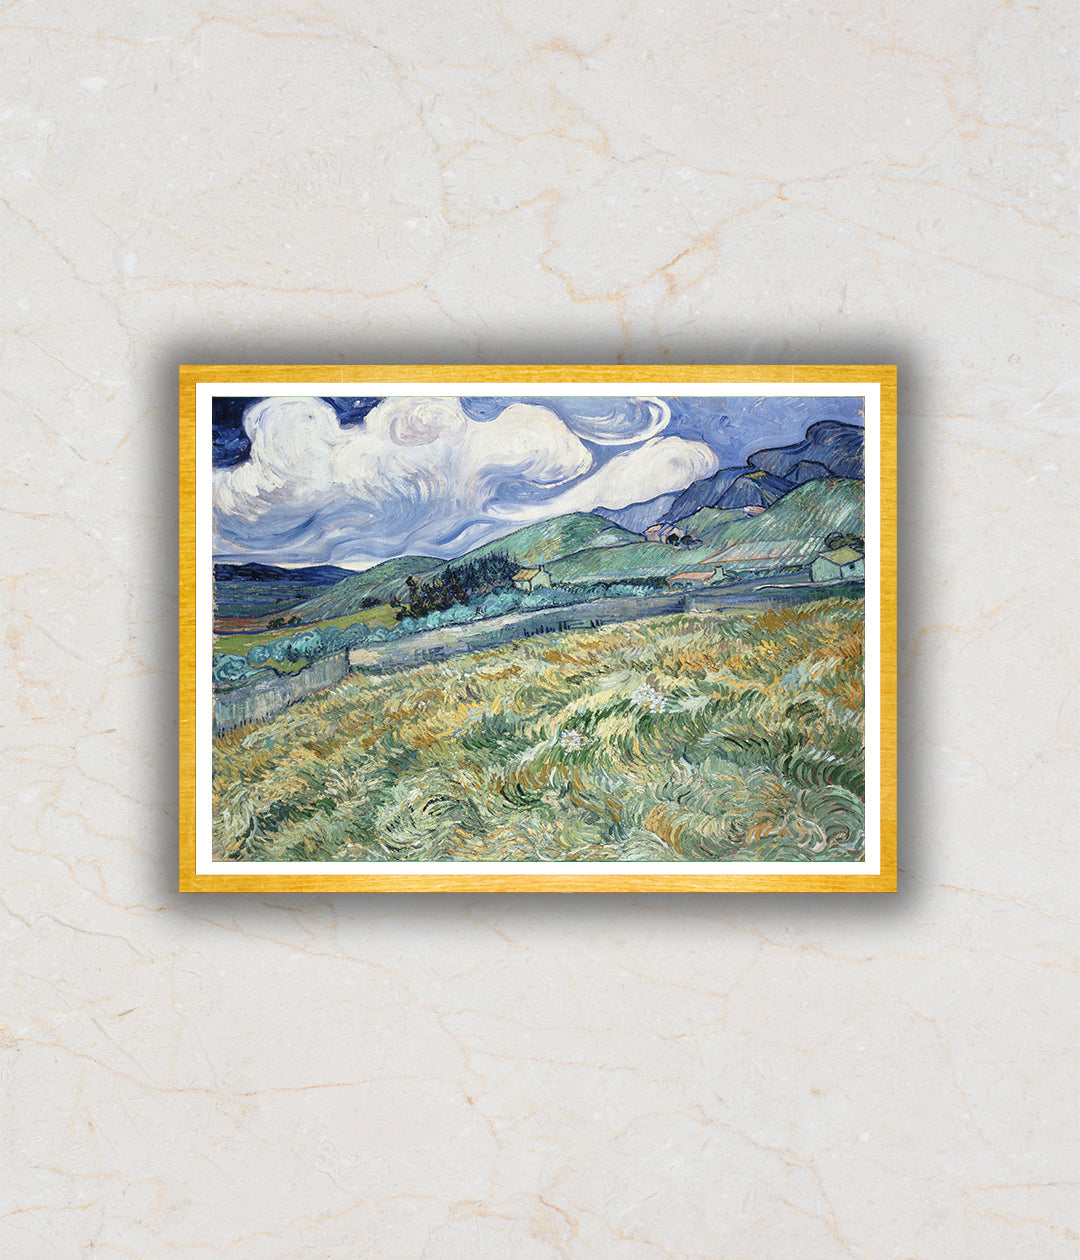 Landscape from Saint R�_my Artwork Painting For Home Wall Art D�_cor By Vincent Van Gogh